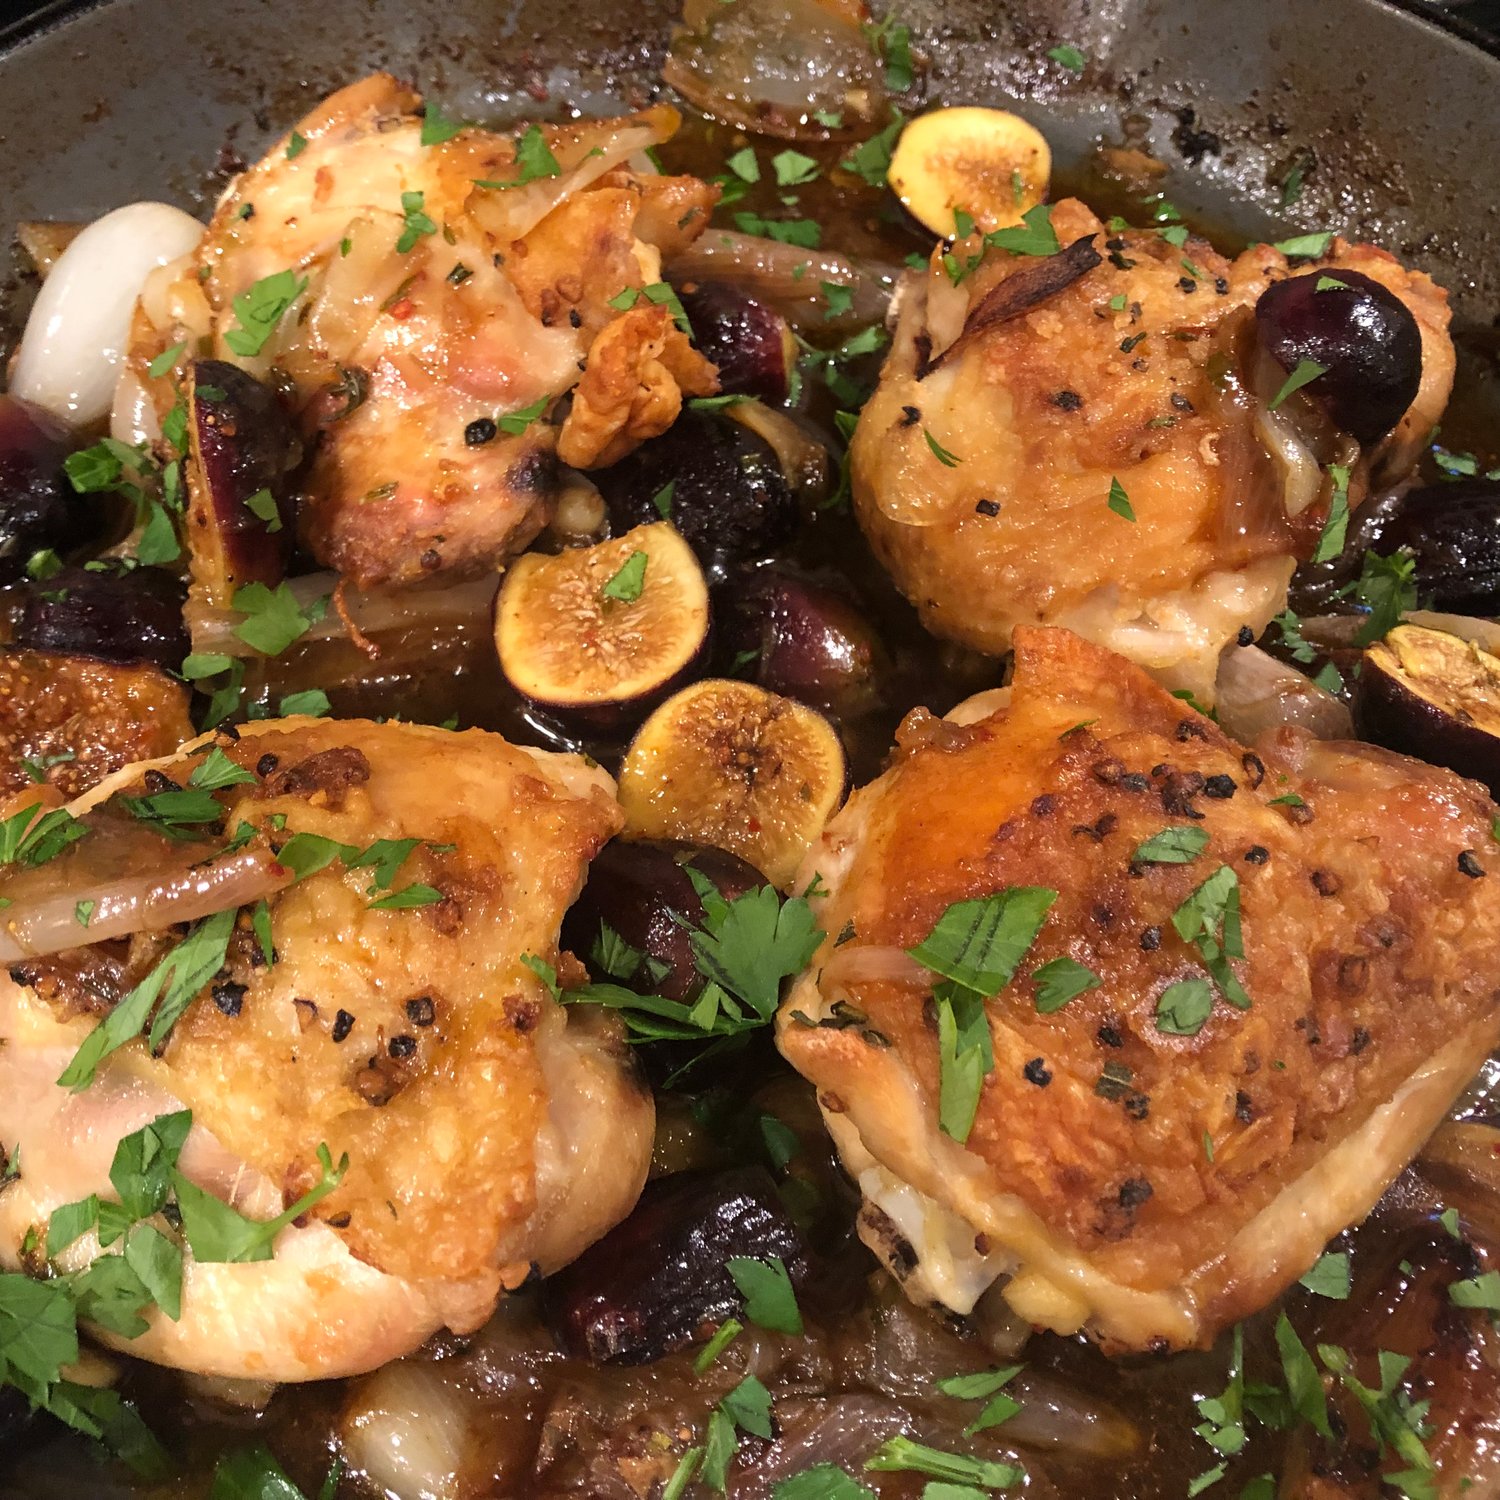 This Chicken Thighs with Fresh Figs recipe was inspired by the late chef Judy Rodgers of Zuni Café in San Francisco.